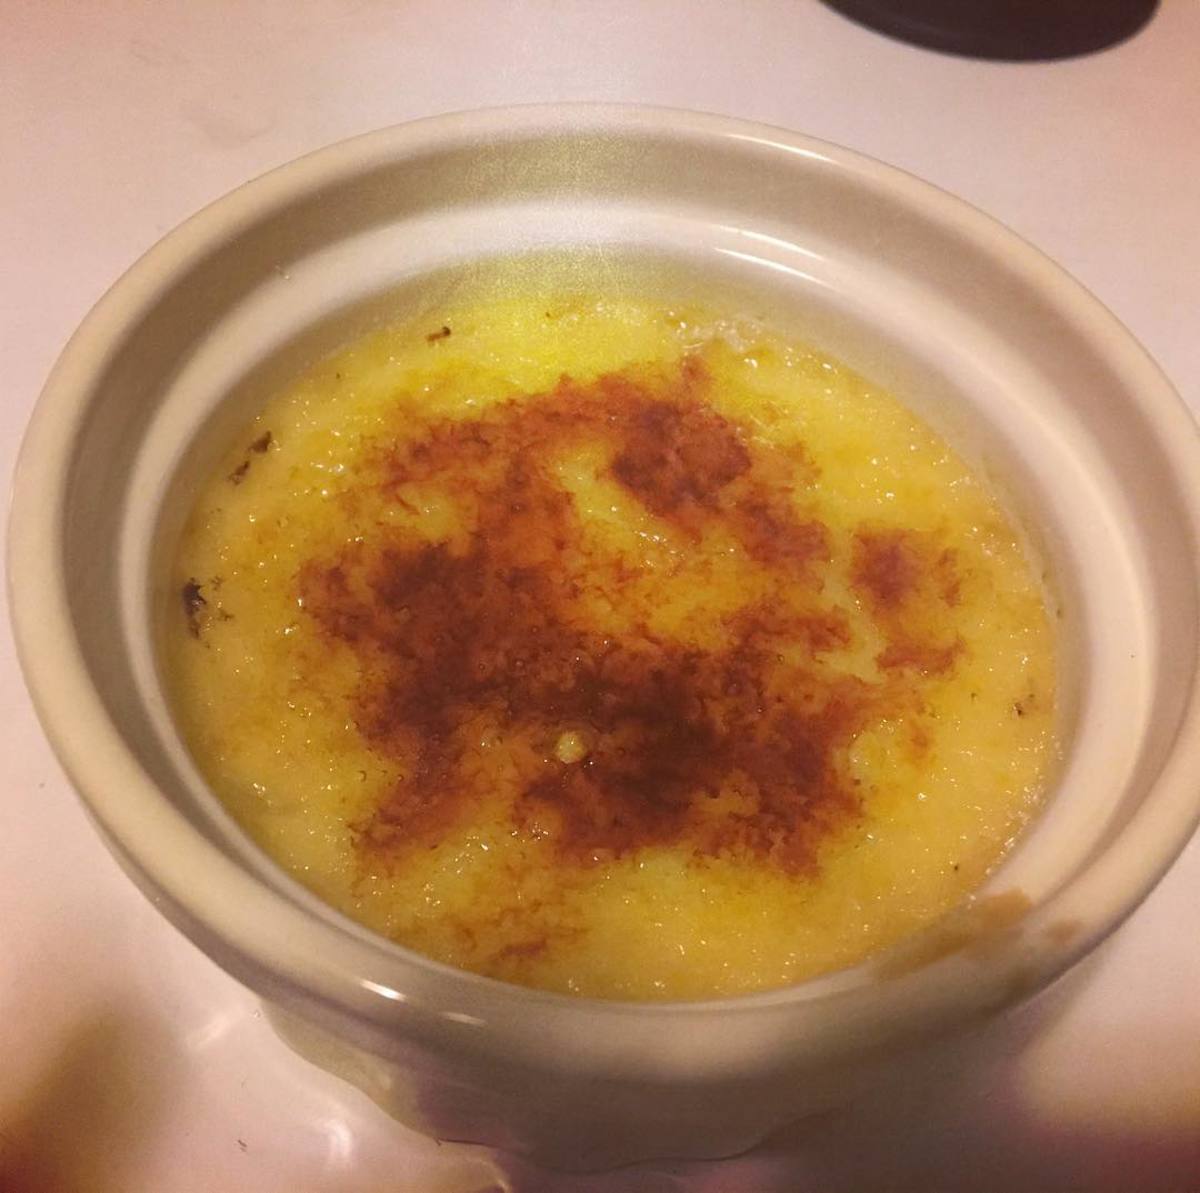 If you follow to simple directions below, your vanilla crème brûlée should look something like this.